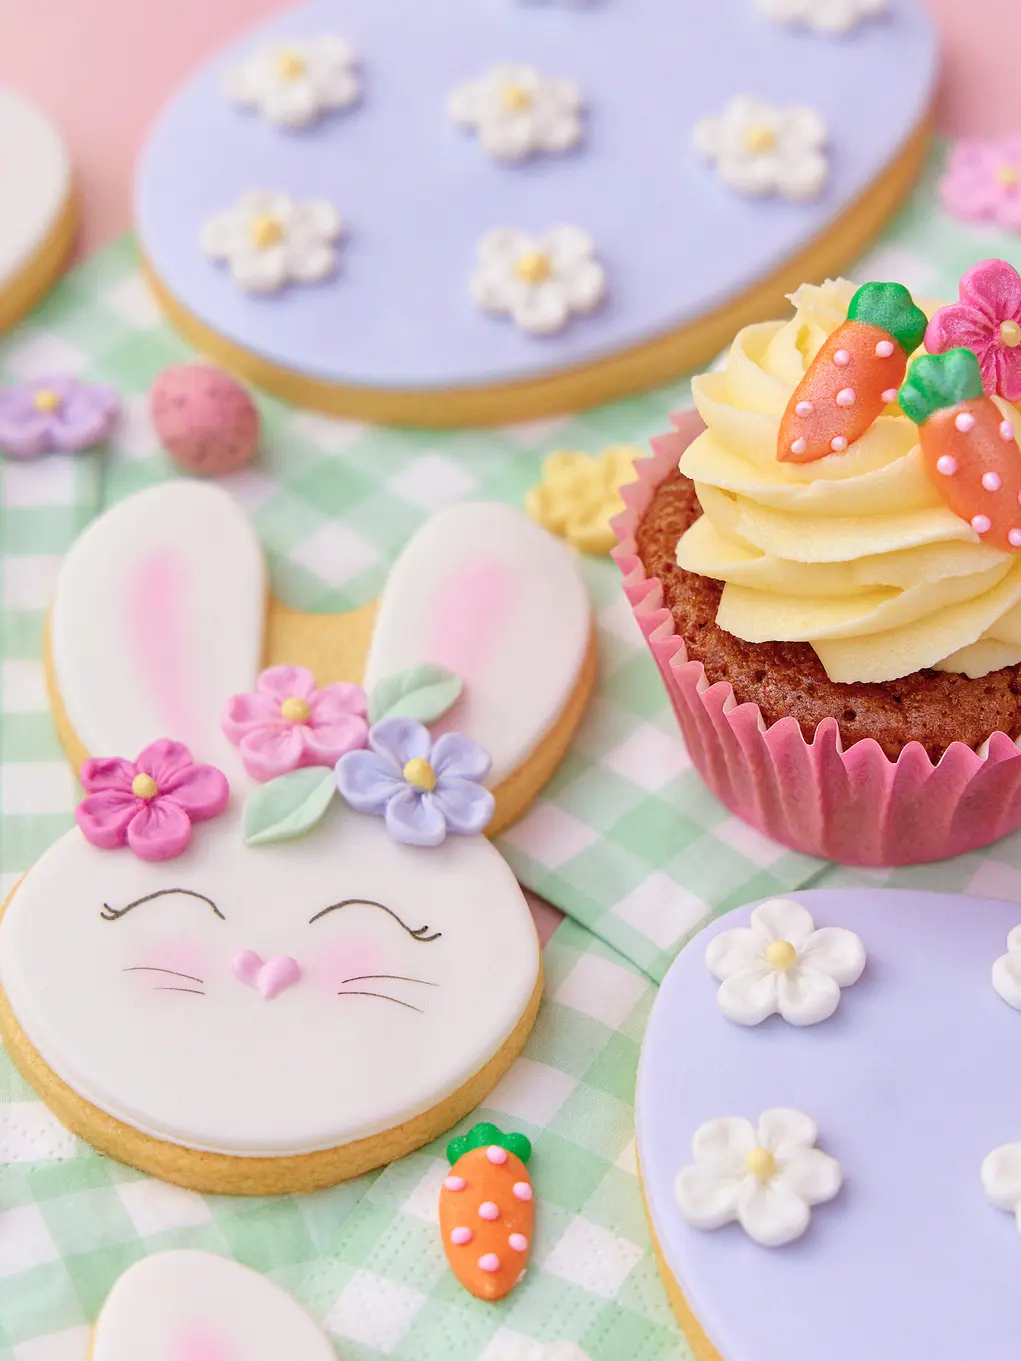 Biscuits shaped like bunnies and a cupcake topped with sugar carrots